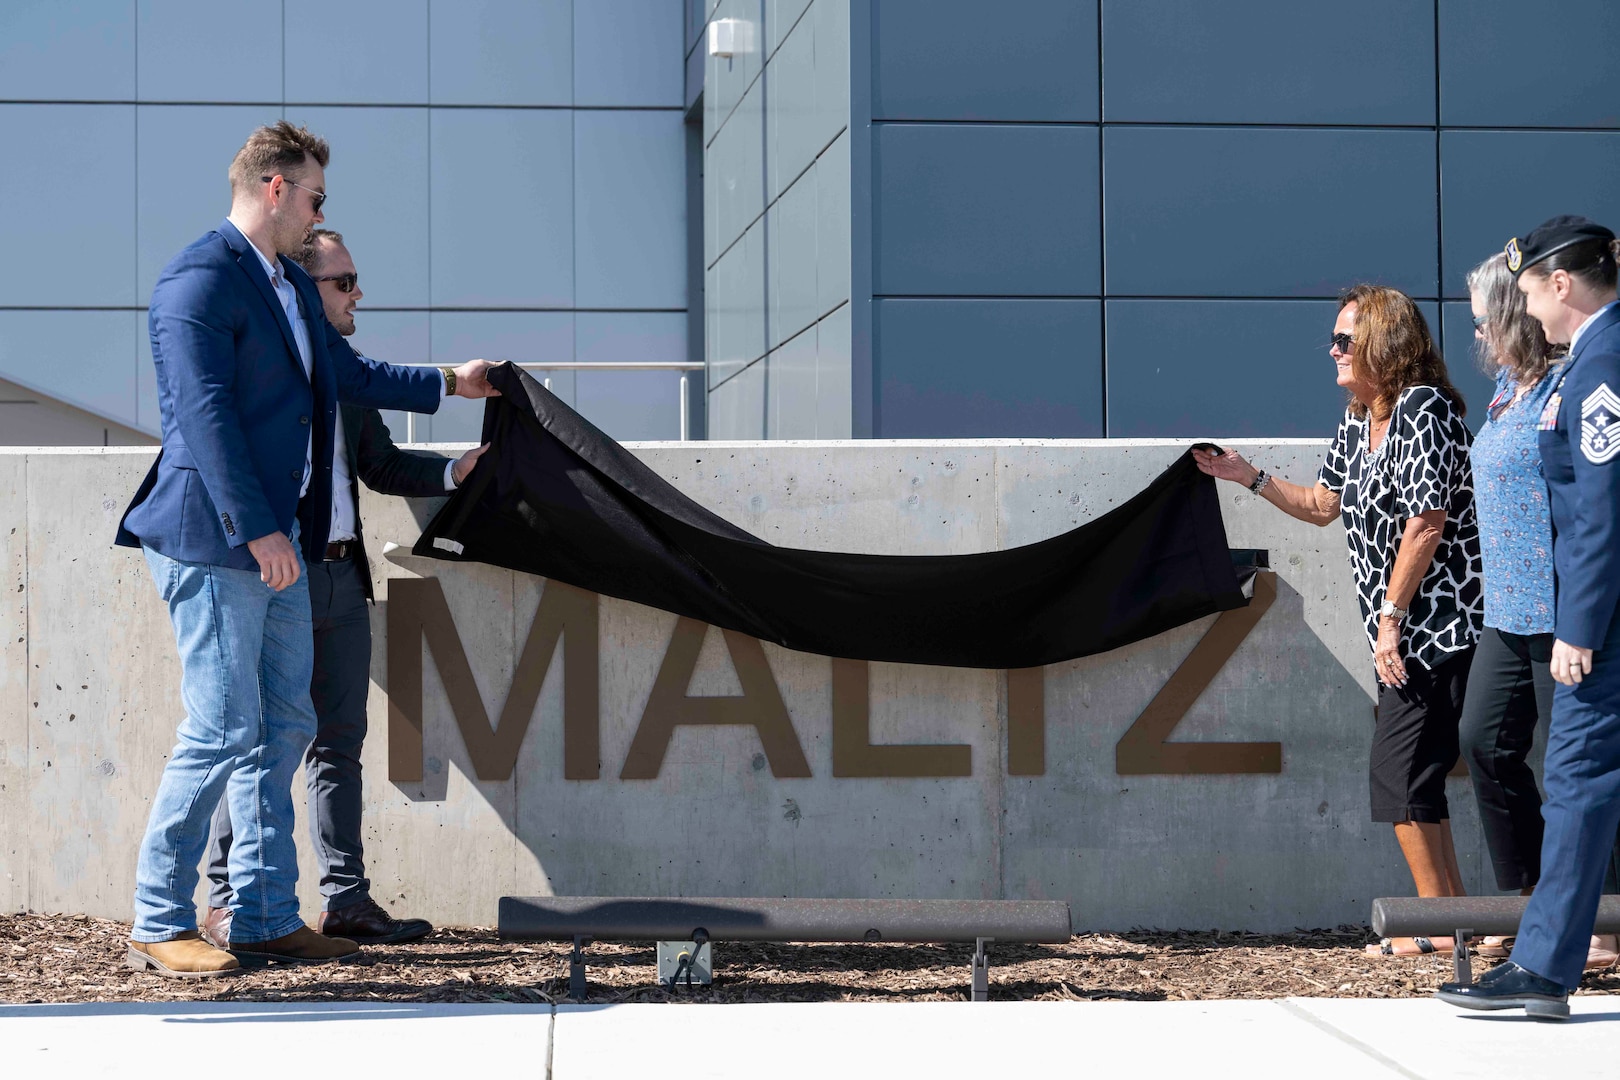 A group of people remove a cloth unveiling the official name of a new aquatic training center named after U.S. Air Force Master Sgt. Michael Maltz.